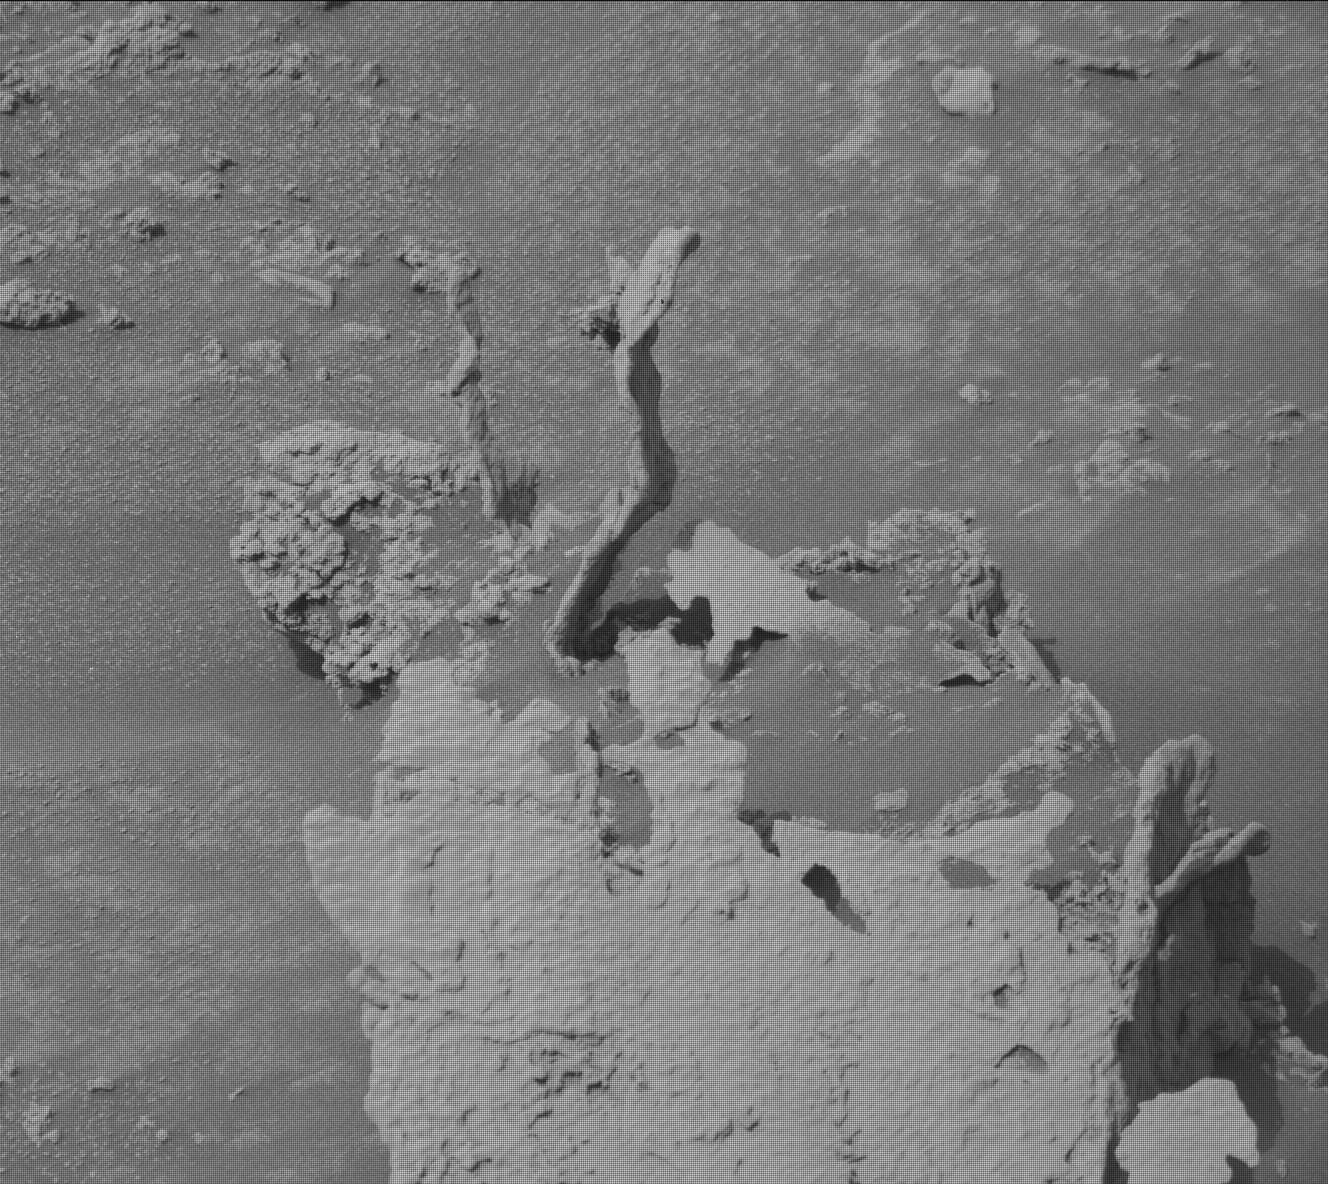 Curiosity Sees Bizarre Spikes on Mars - Universe Today